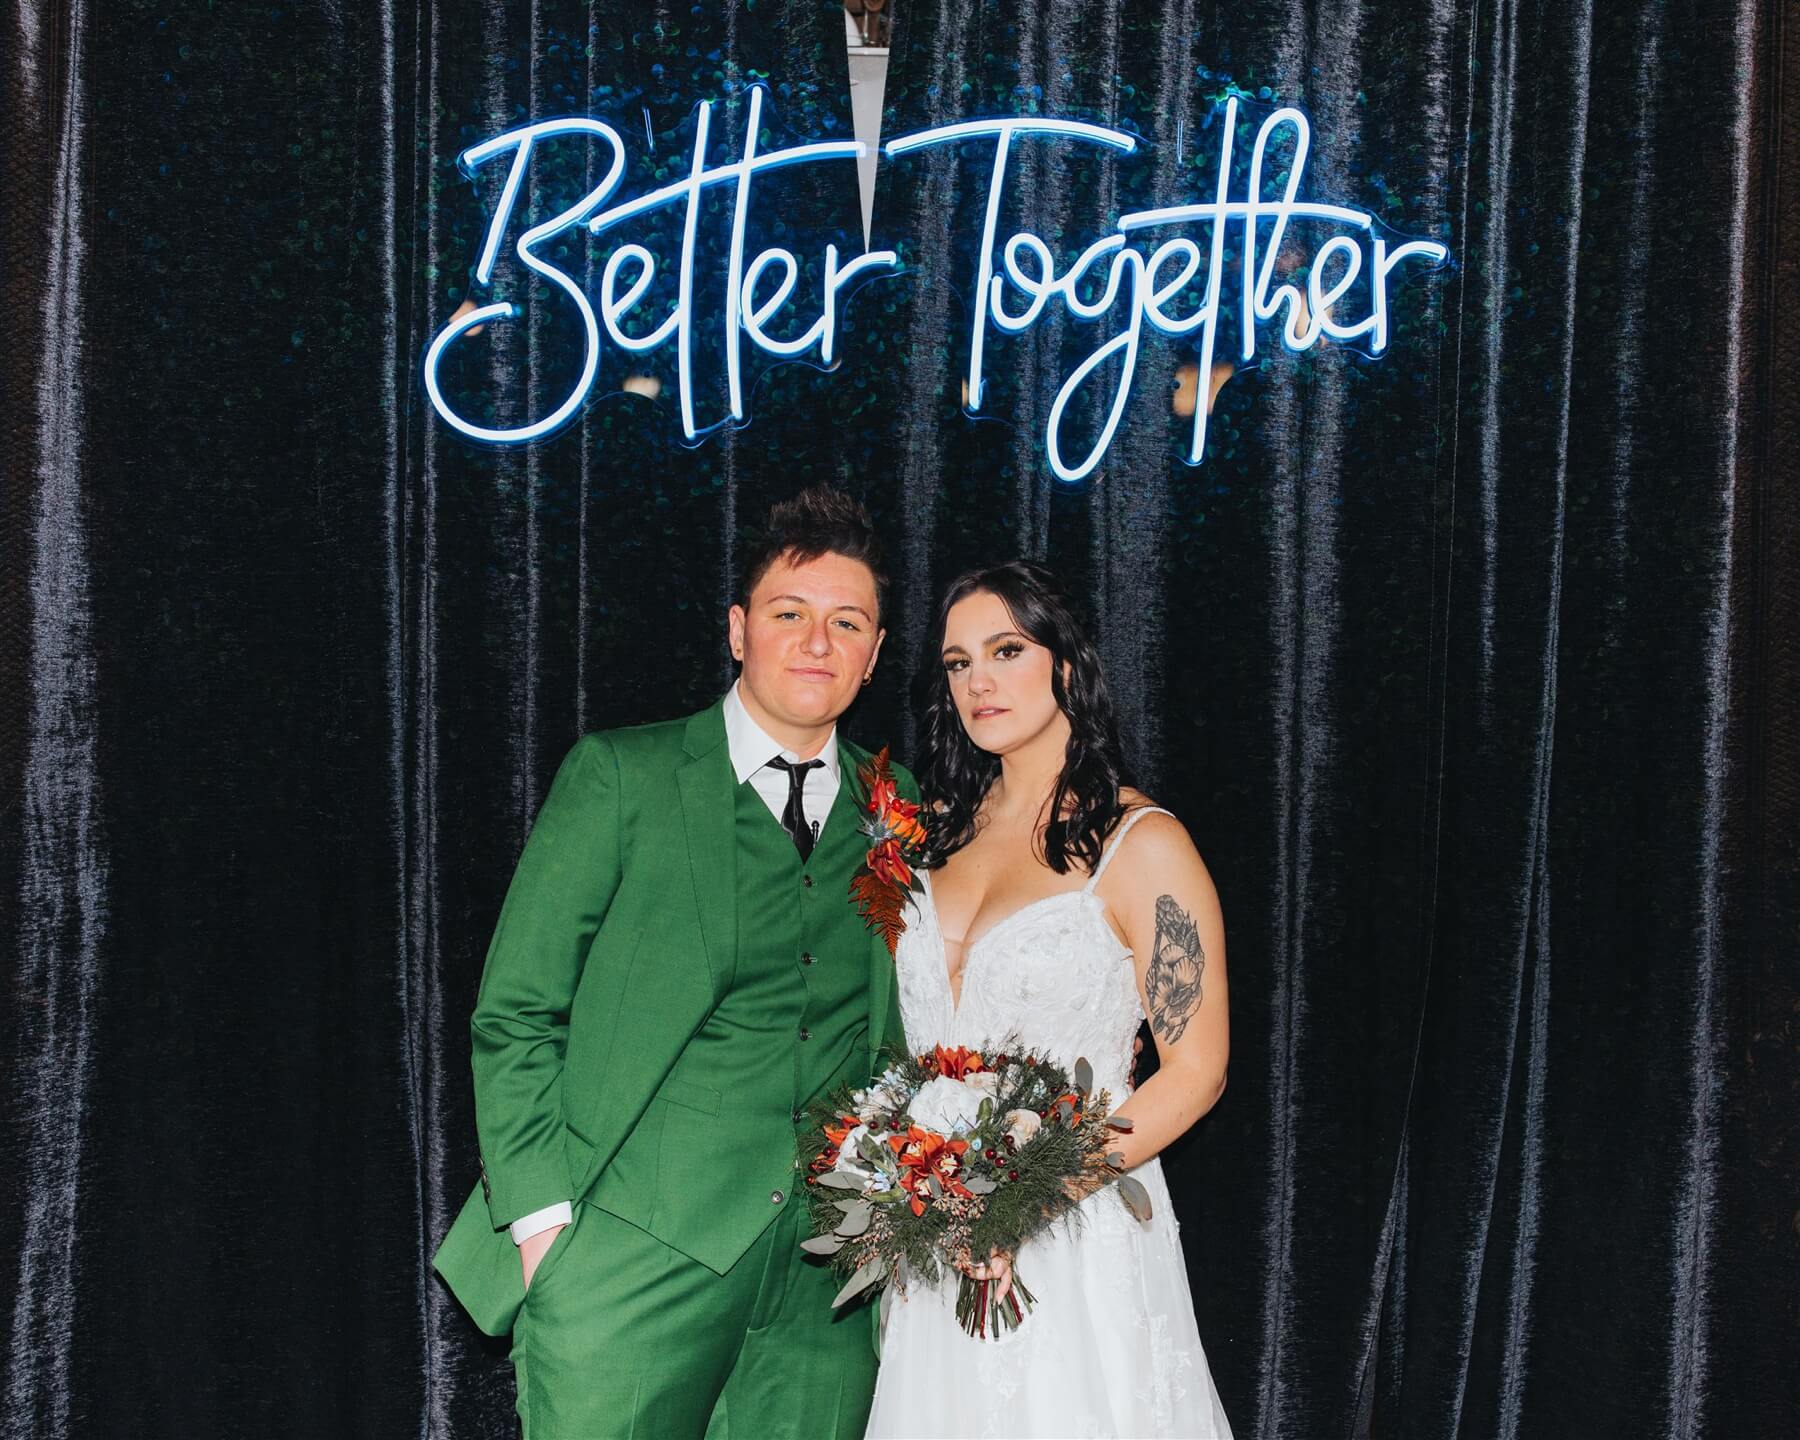 Couple standing under neon better together sign